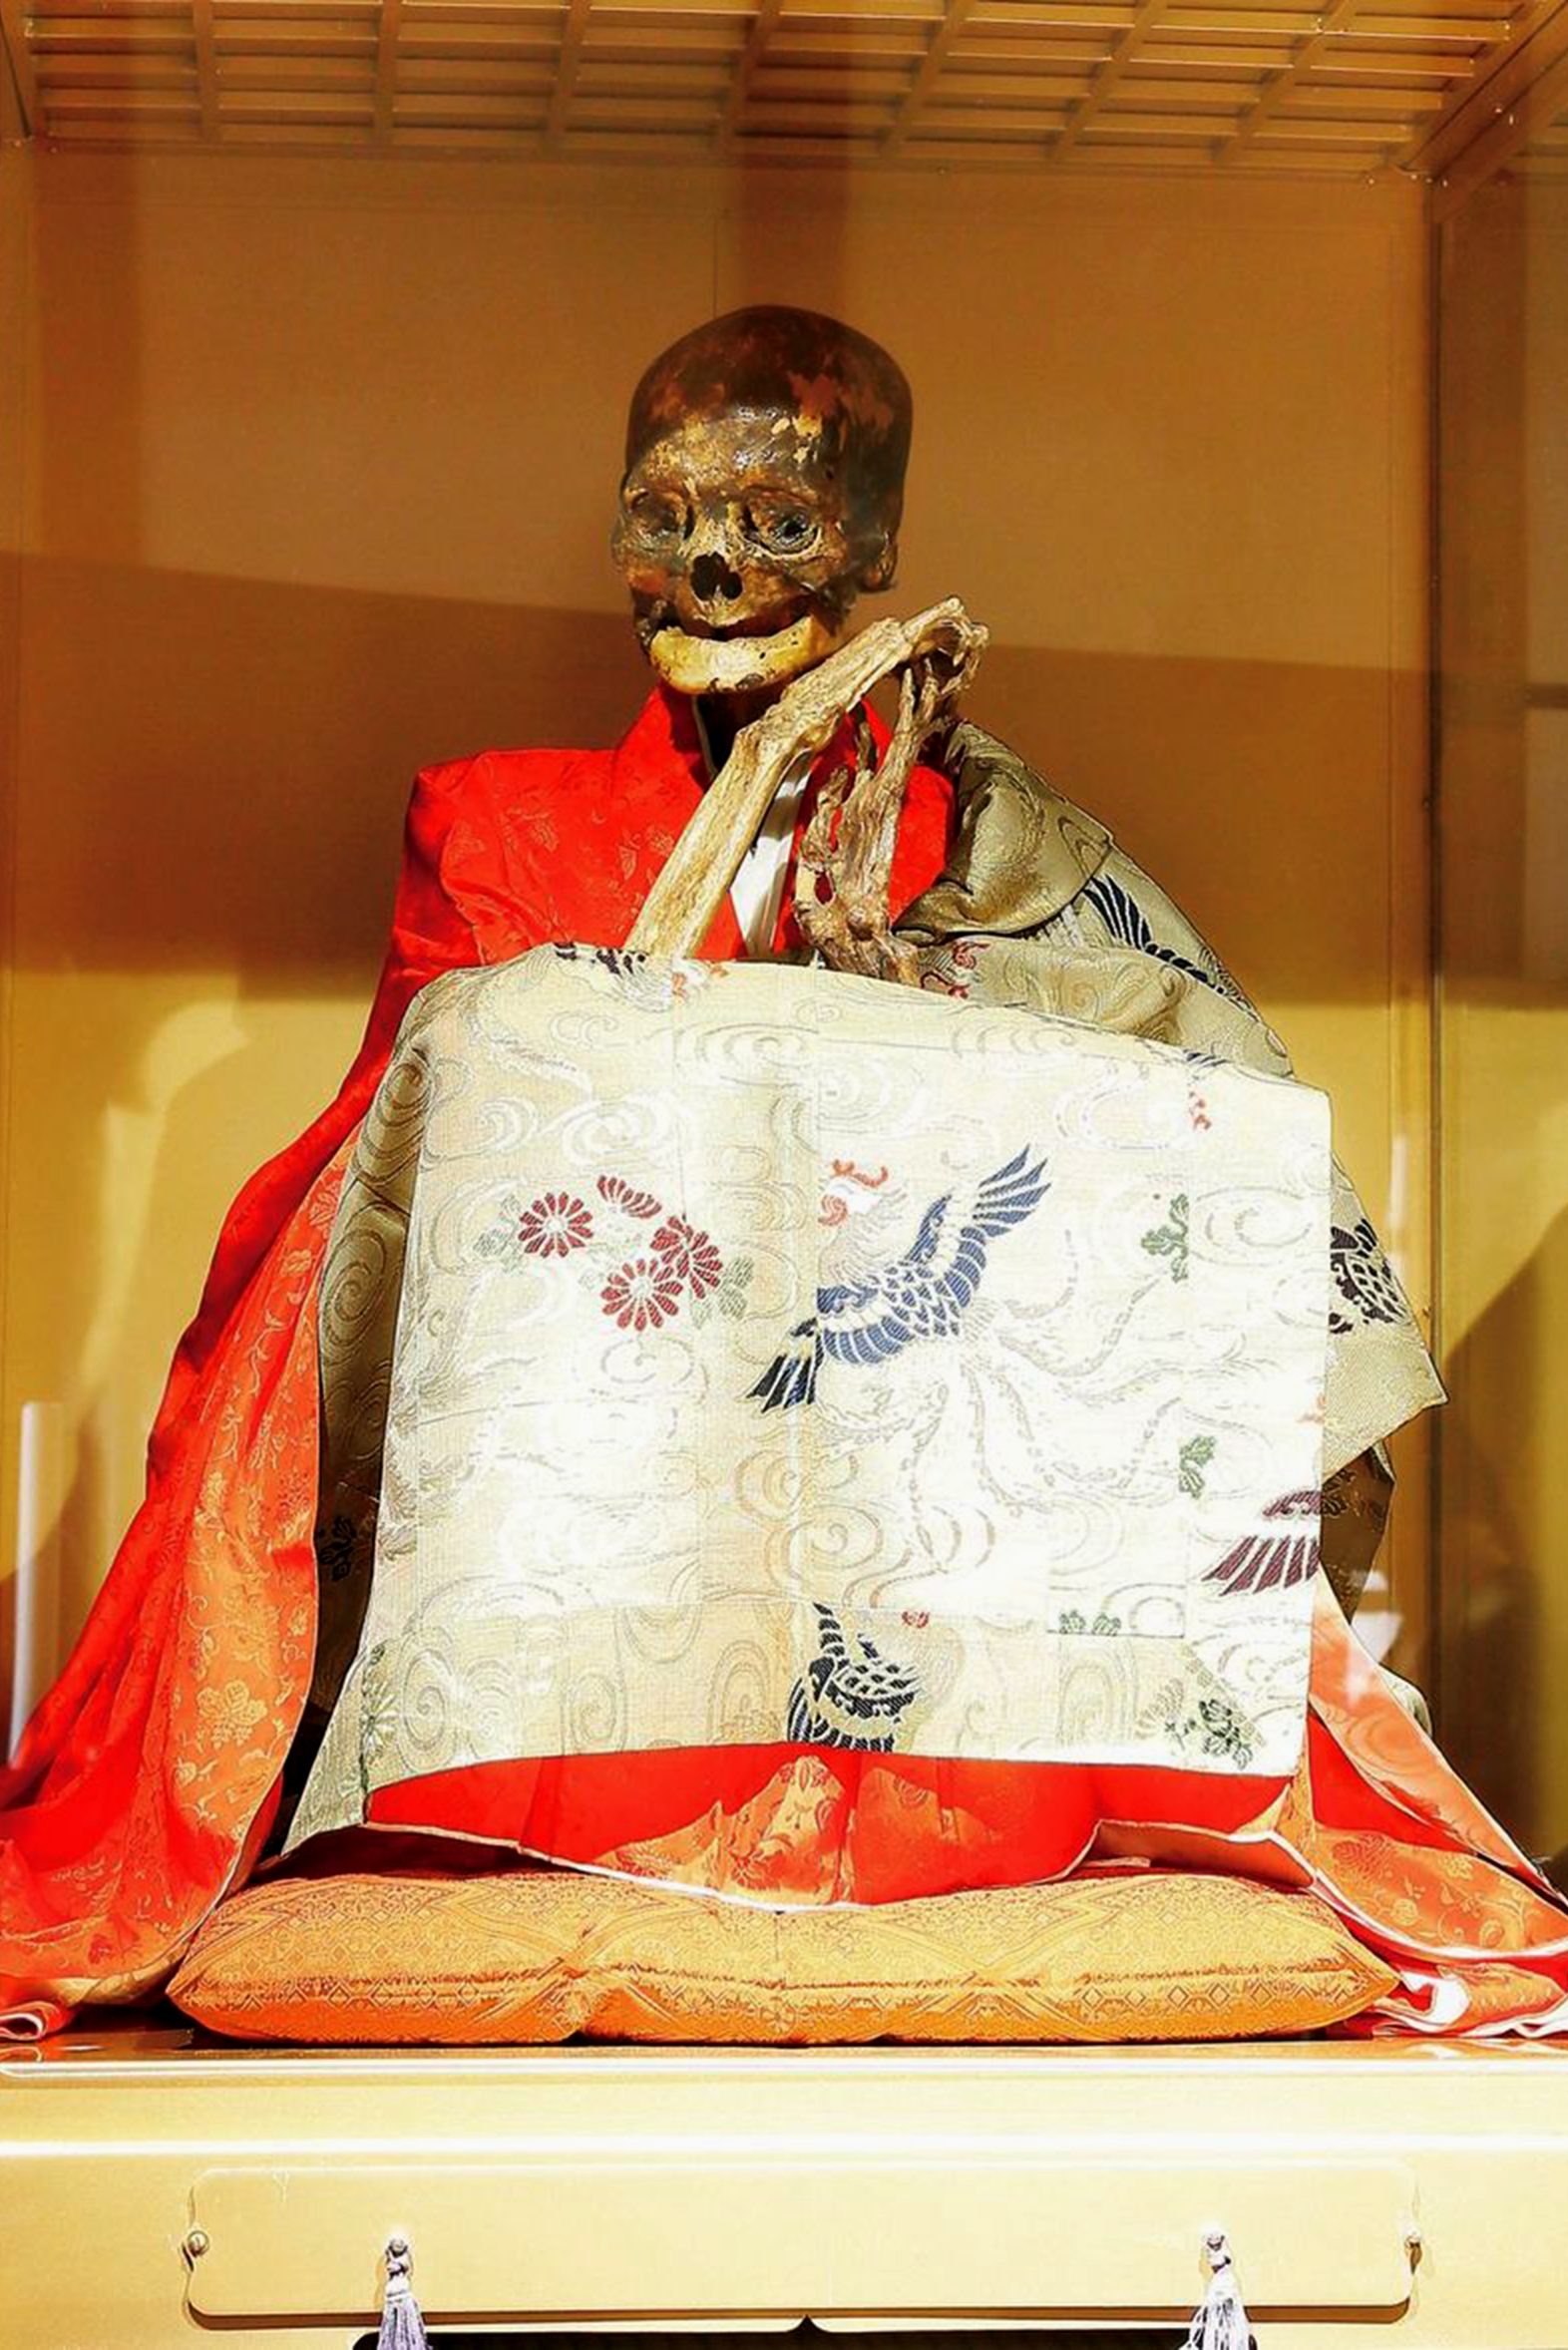 A photograph of a mummified Japanese monk. The mummy is in a sitting position inside a glass cabinet. It is wearing a bright red robe.